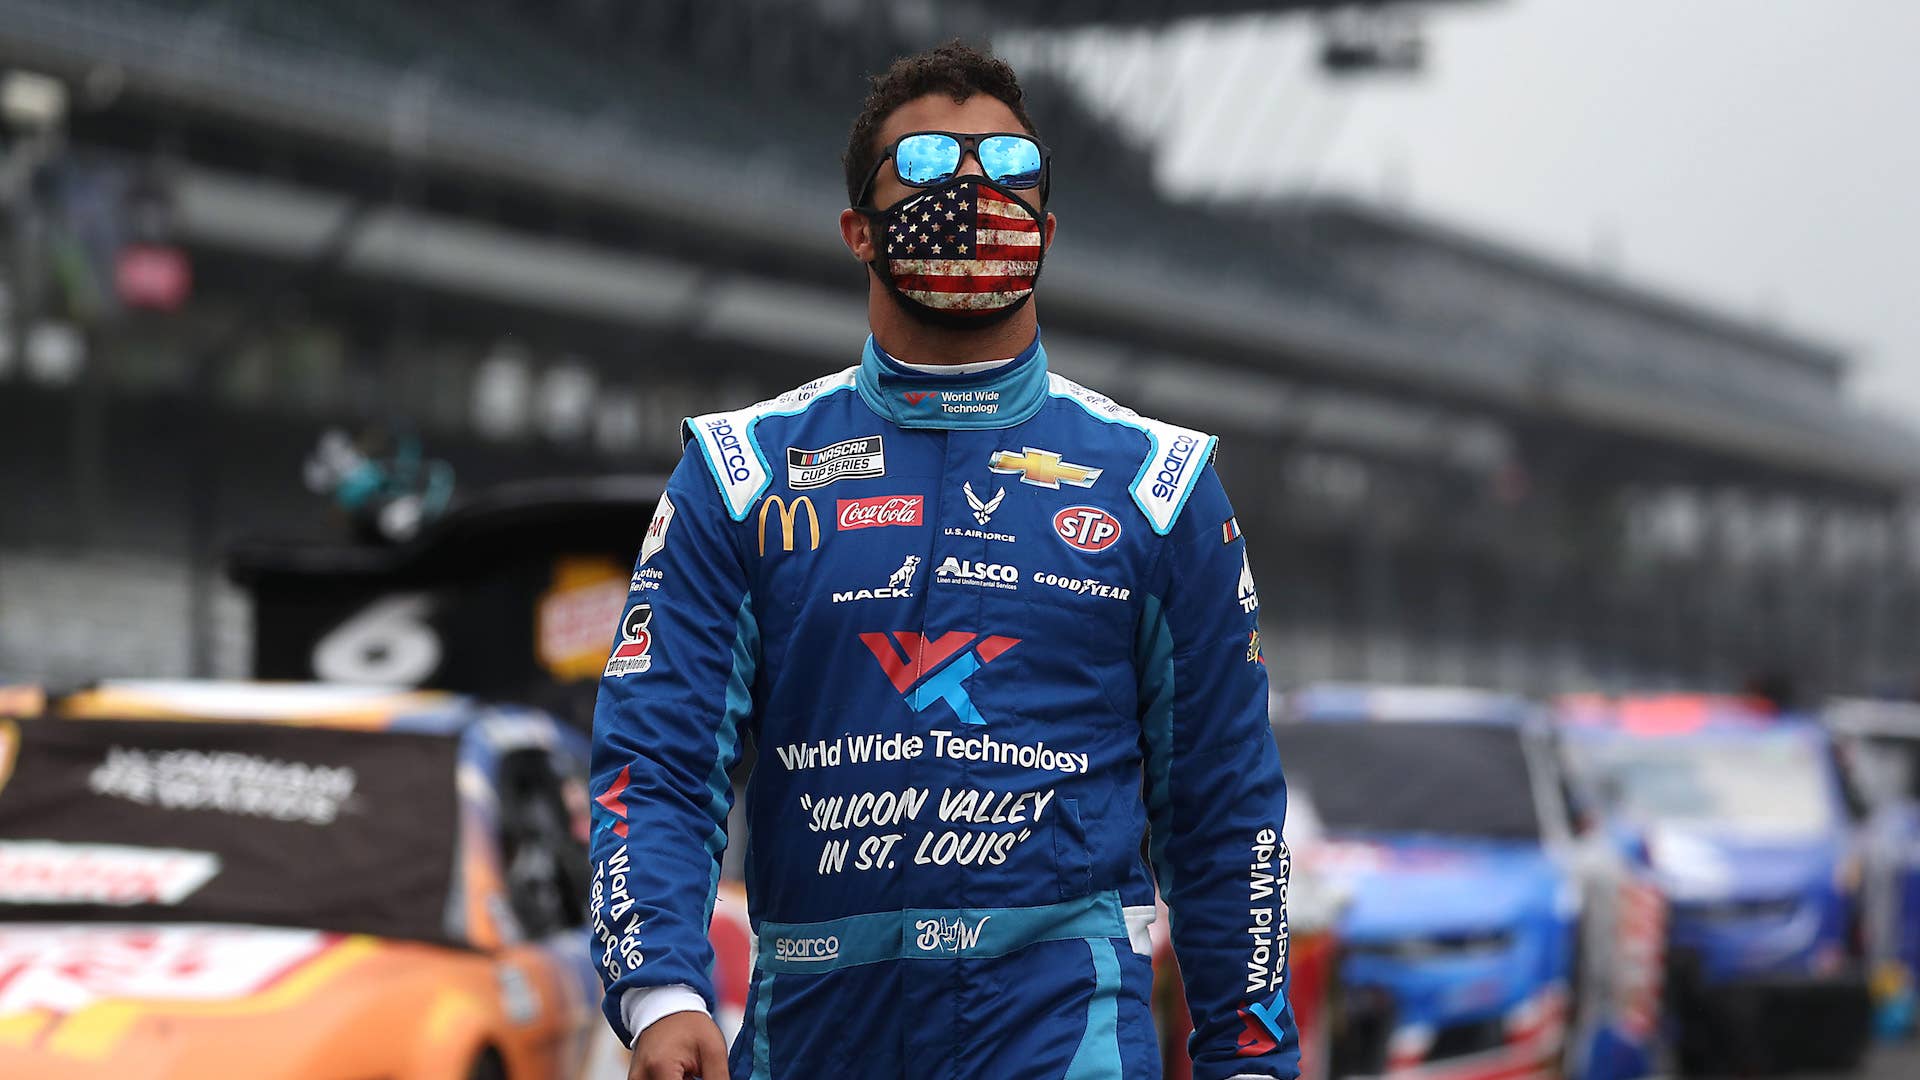 Bubba Wallace, driver of the #43 World Wide Technology Chevrolet